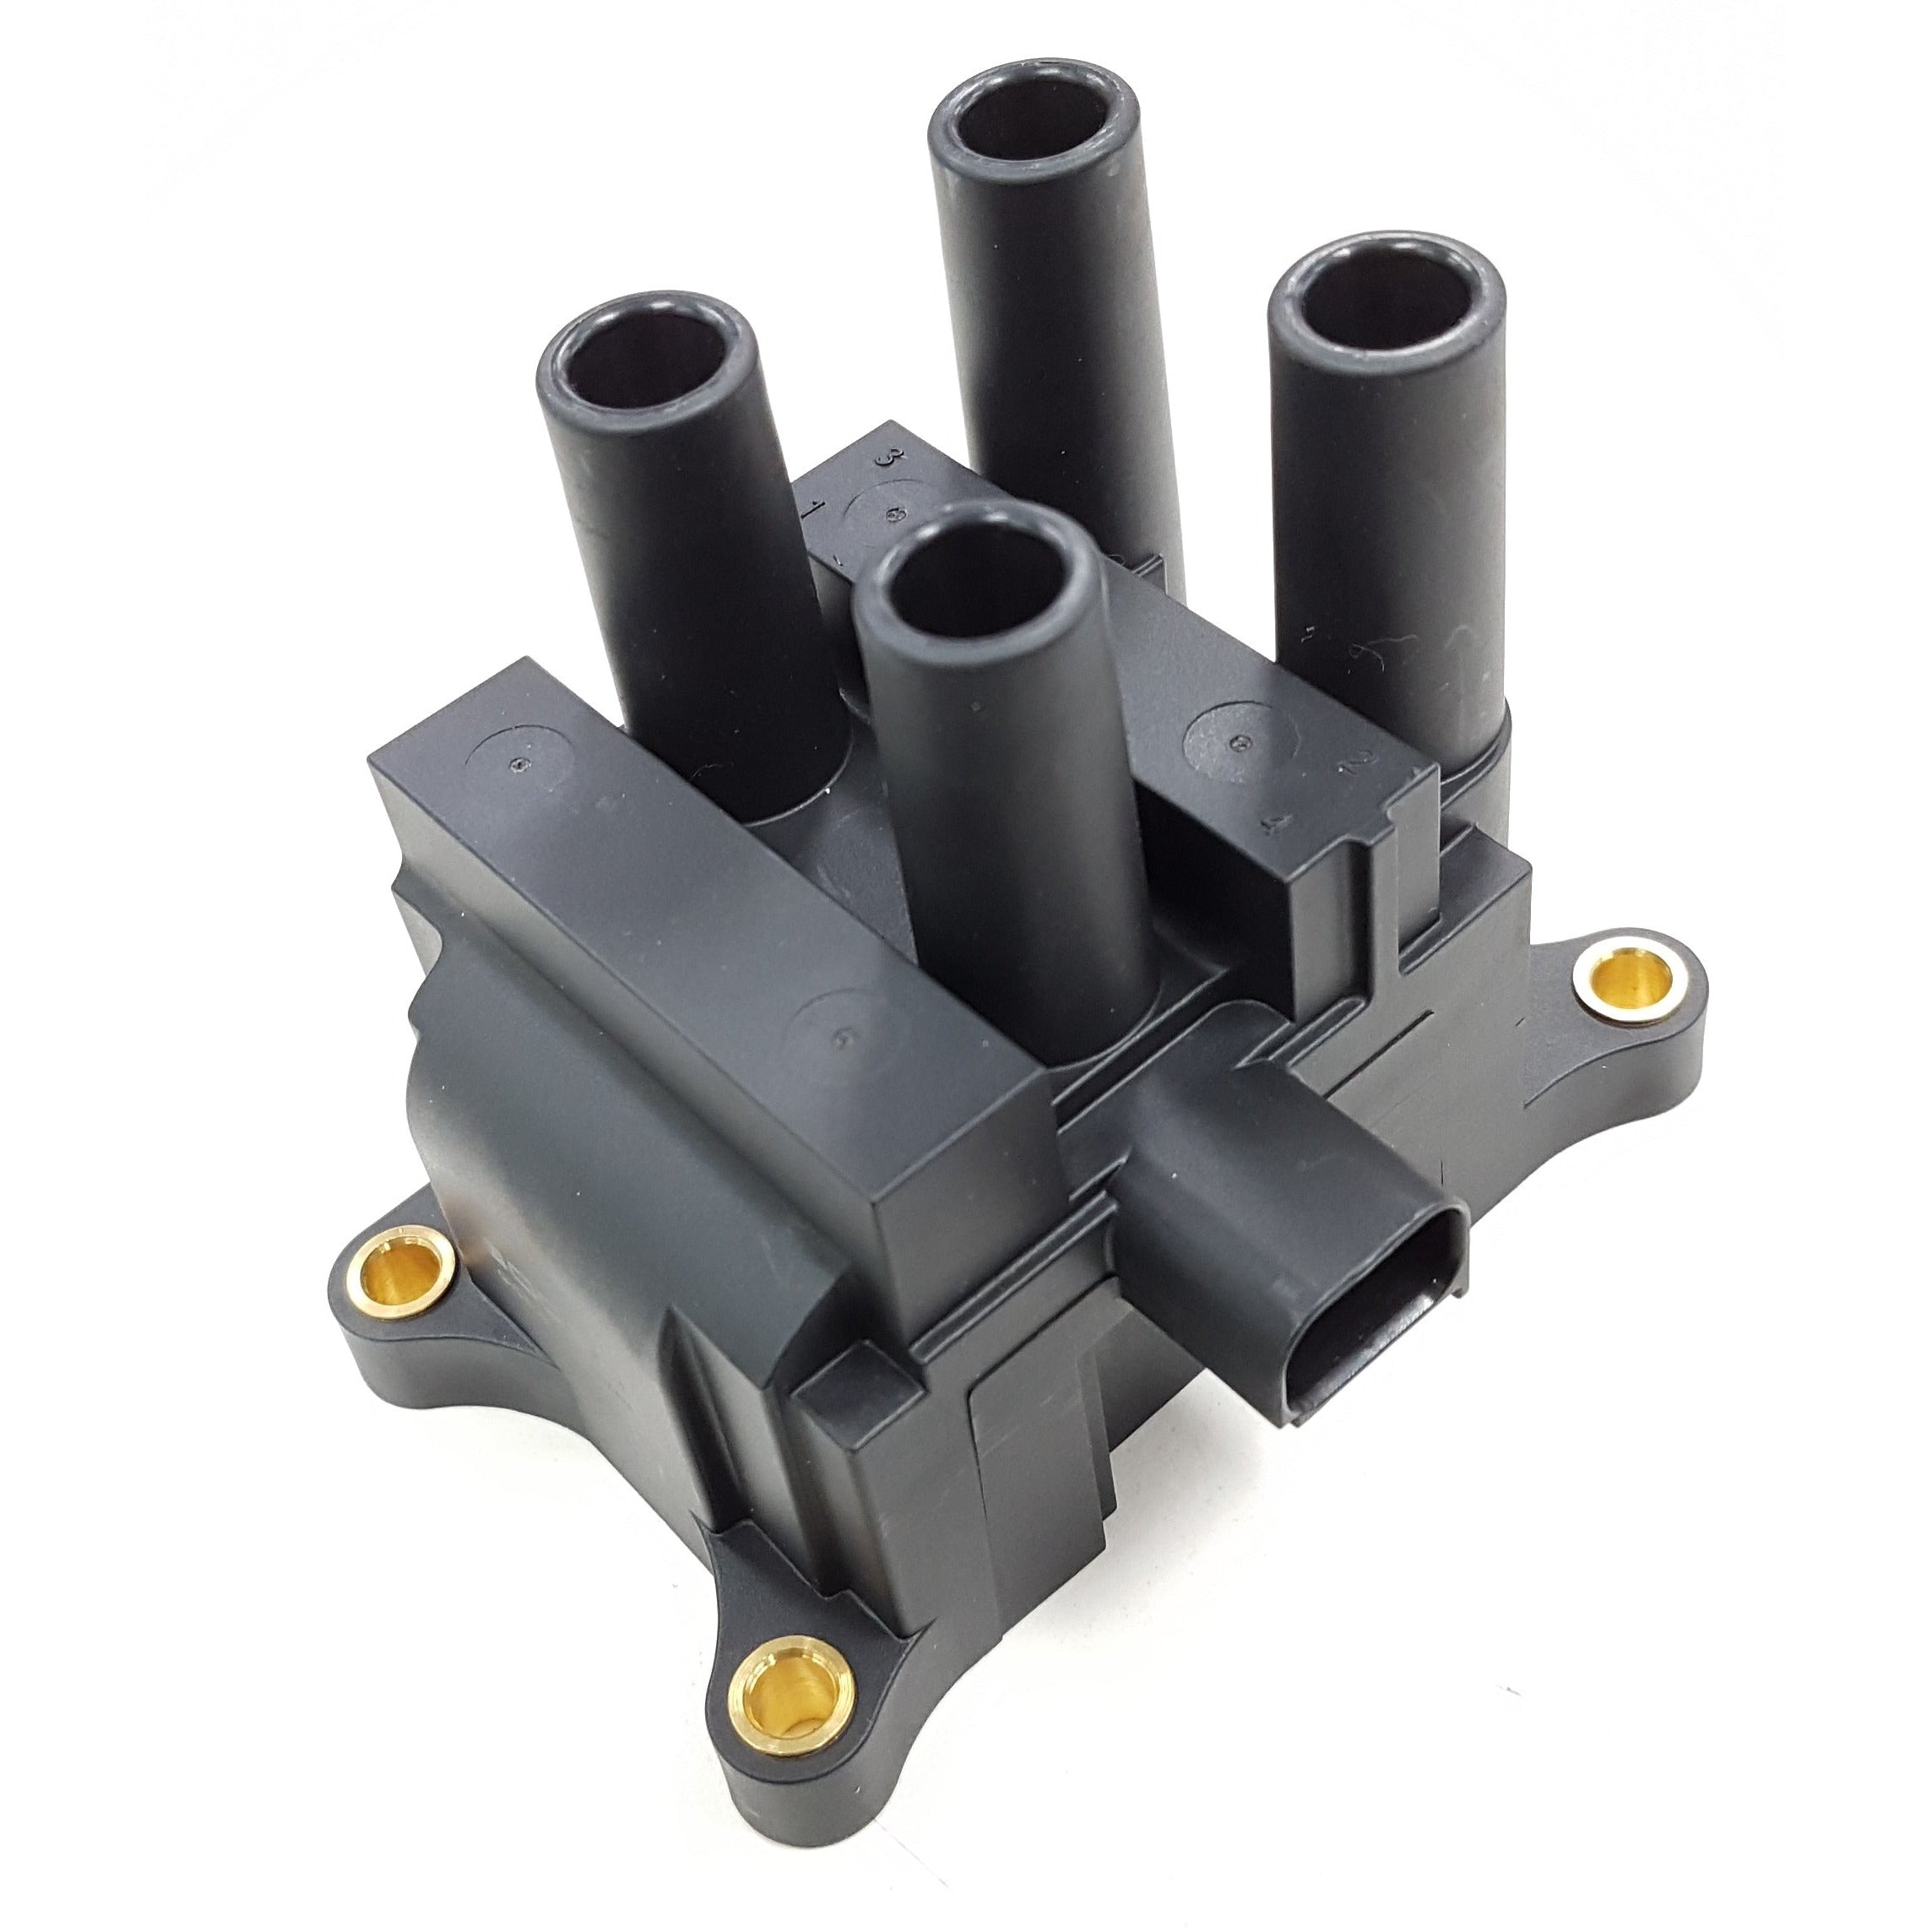 Goss Ignition Coil - [Suit Ford, Mazda] - C655